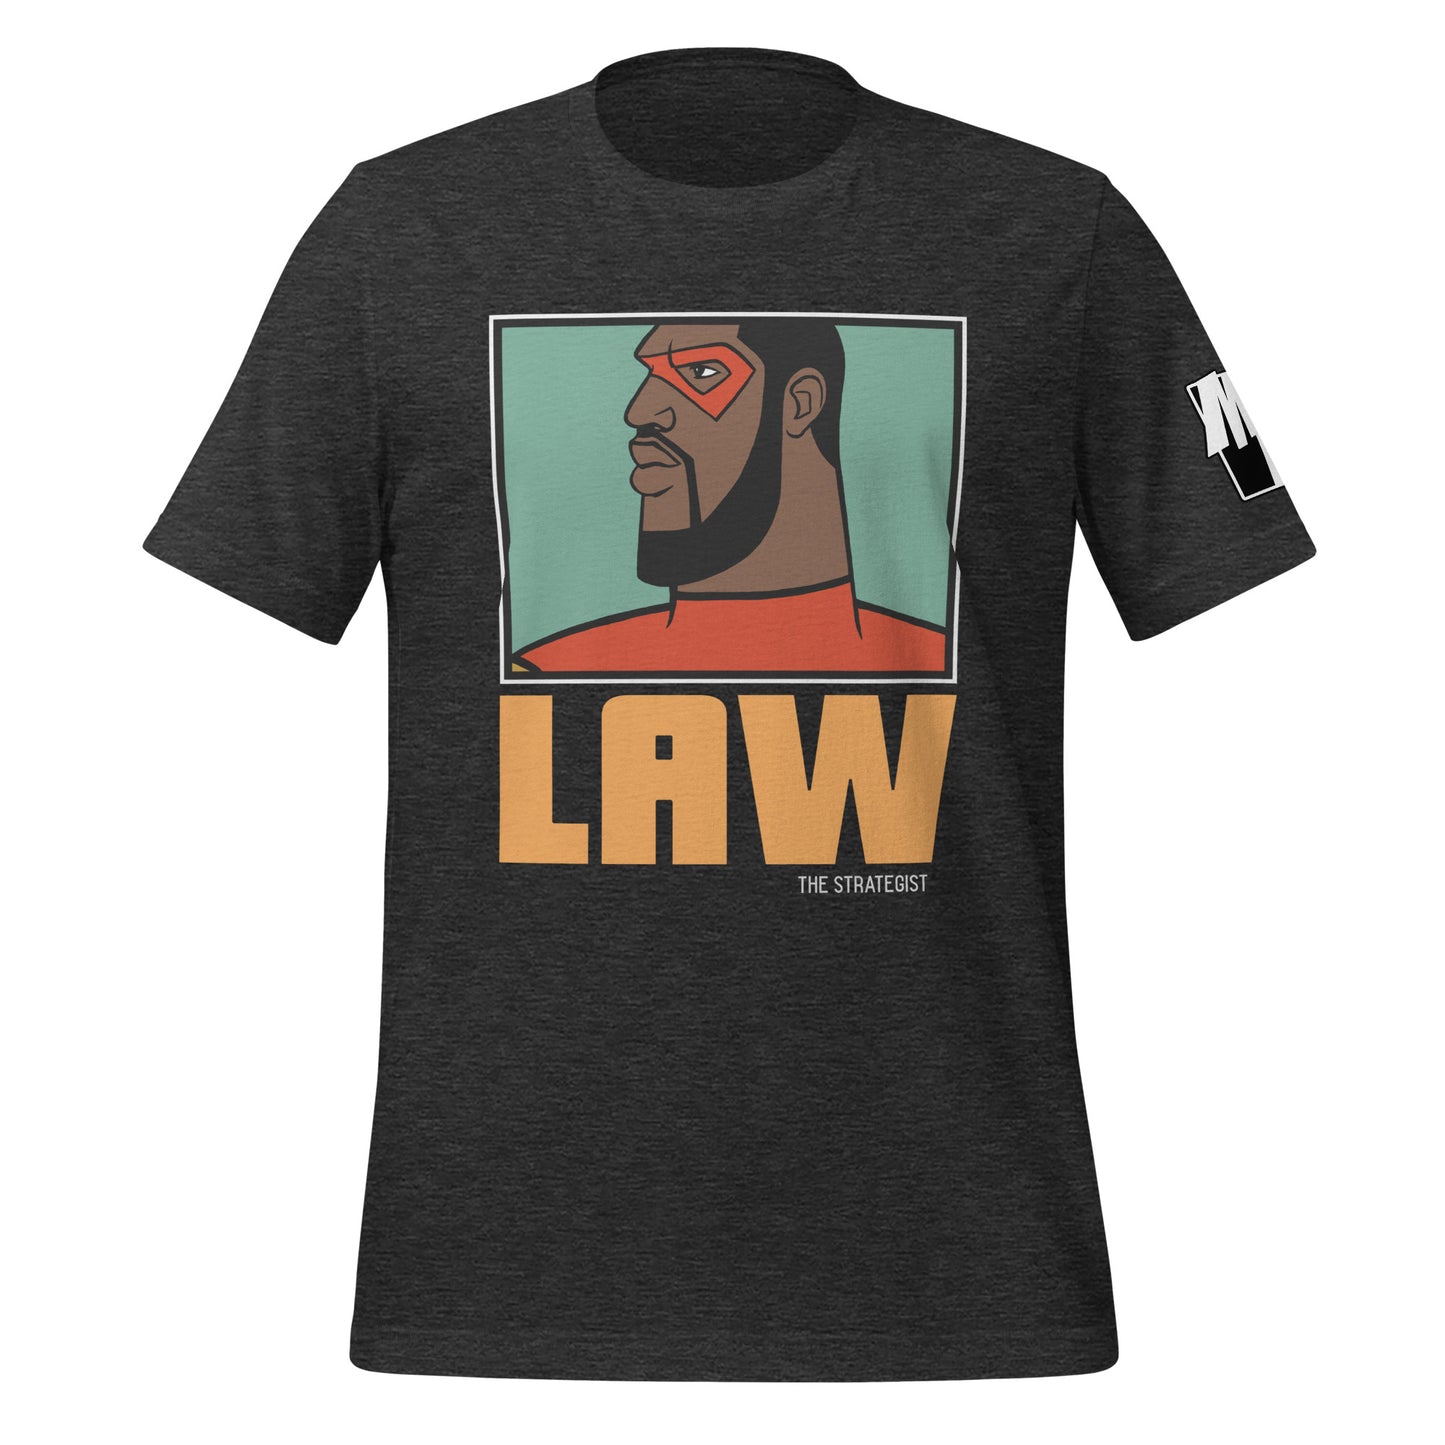 LAW (THE STRATEGIST) T-Shirt